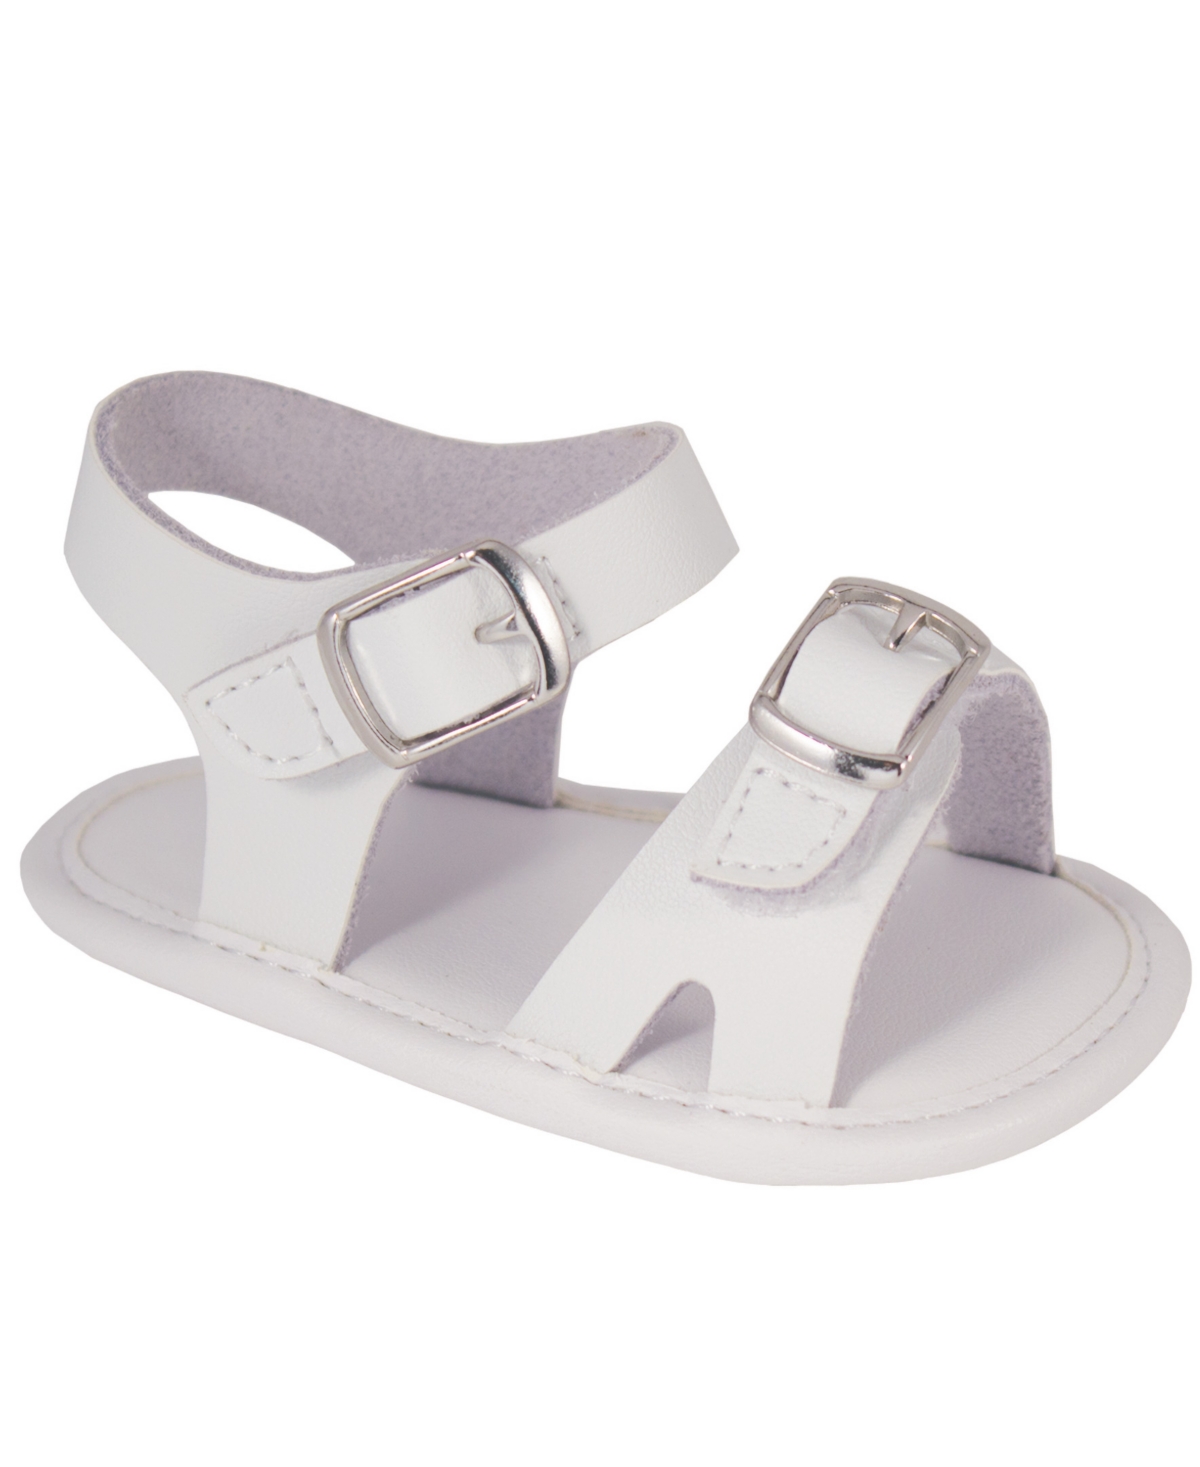 Baby Deer Baby Boys Or Baby Girls Strap Sandal With Buckles In White